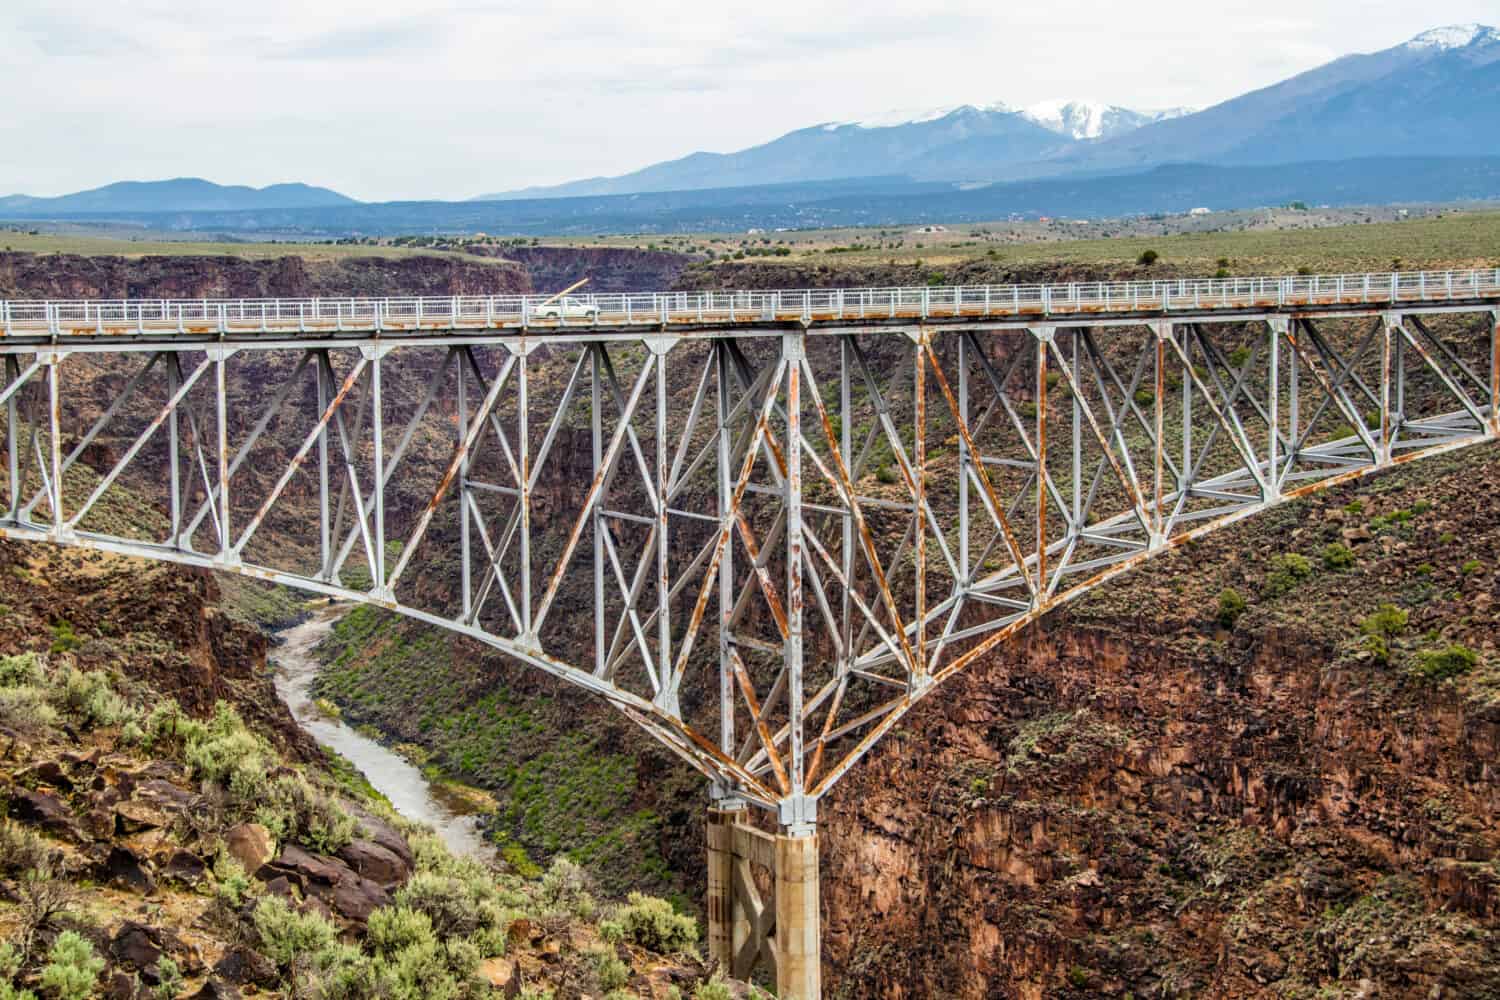 The Rio Grande Gorge Bridge-a steel deck arch bridge across the Rio Grande Gorge 10 miles) northwest of Taos NM United States.- the tenth highest bridge in the USA